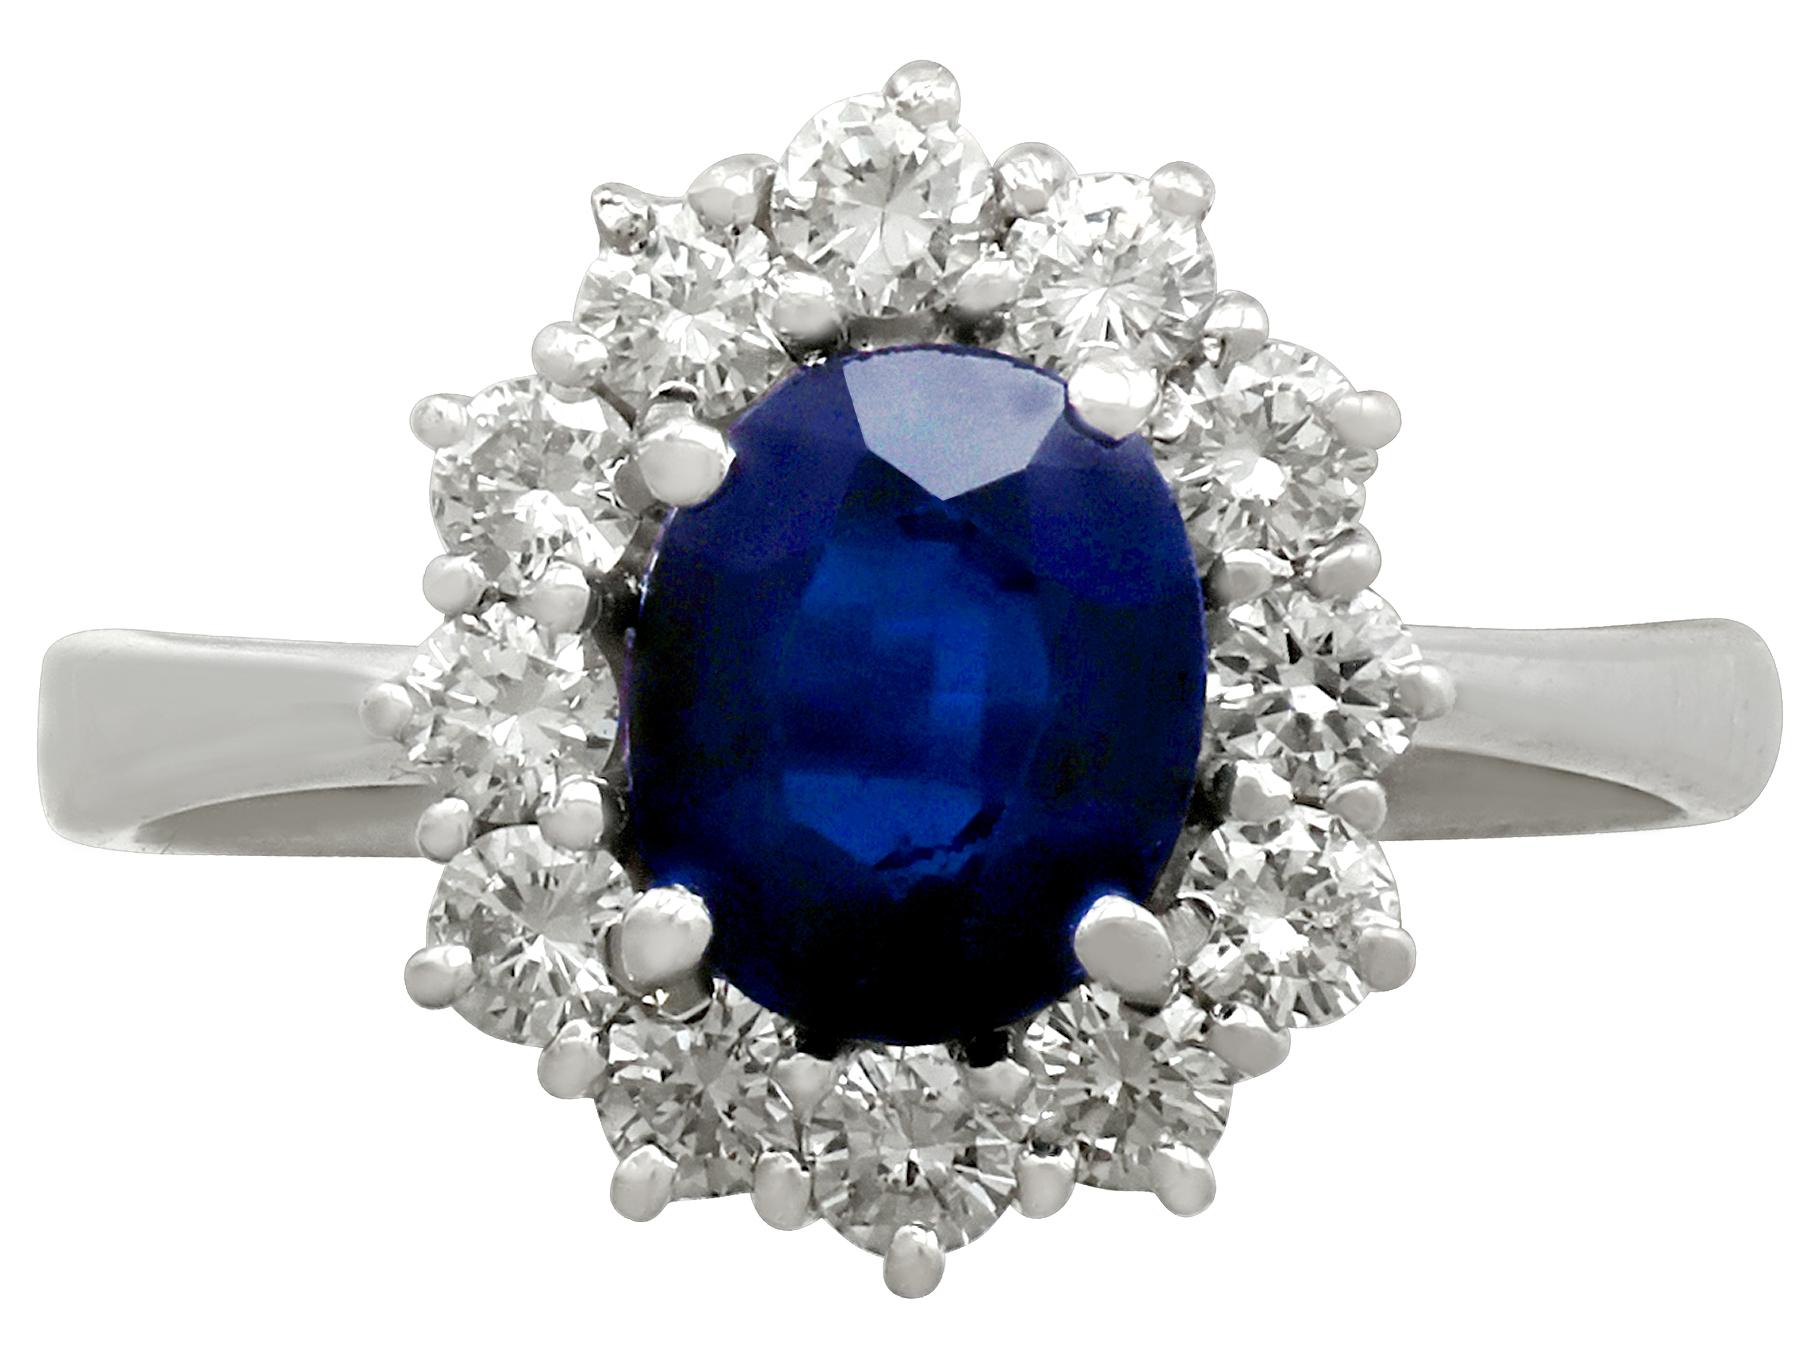 A fine and impressive vintage 1.20 carat natural blue sapphire and 0.60 carat diamond, 18 karat white gold cluster ring; part of our vintage jewelry and estate jewelry collection

This fine and vintage sapphire and diamond cluster ring has been